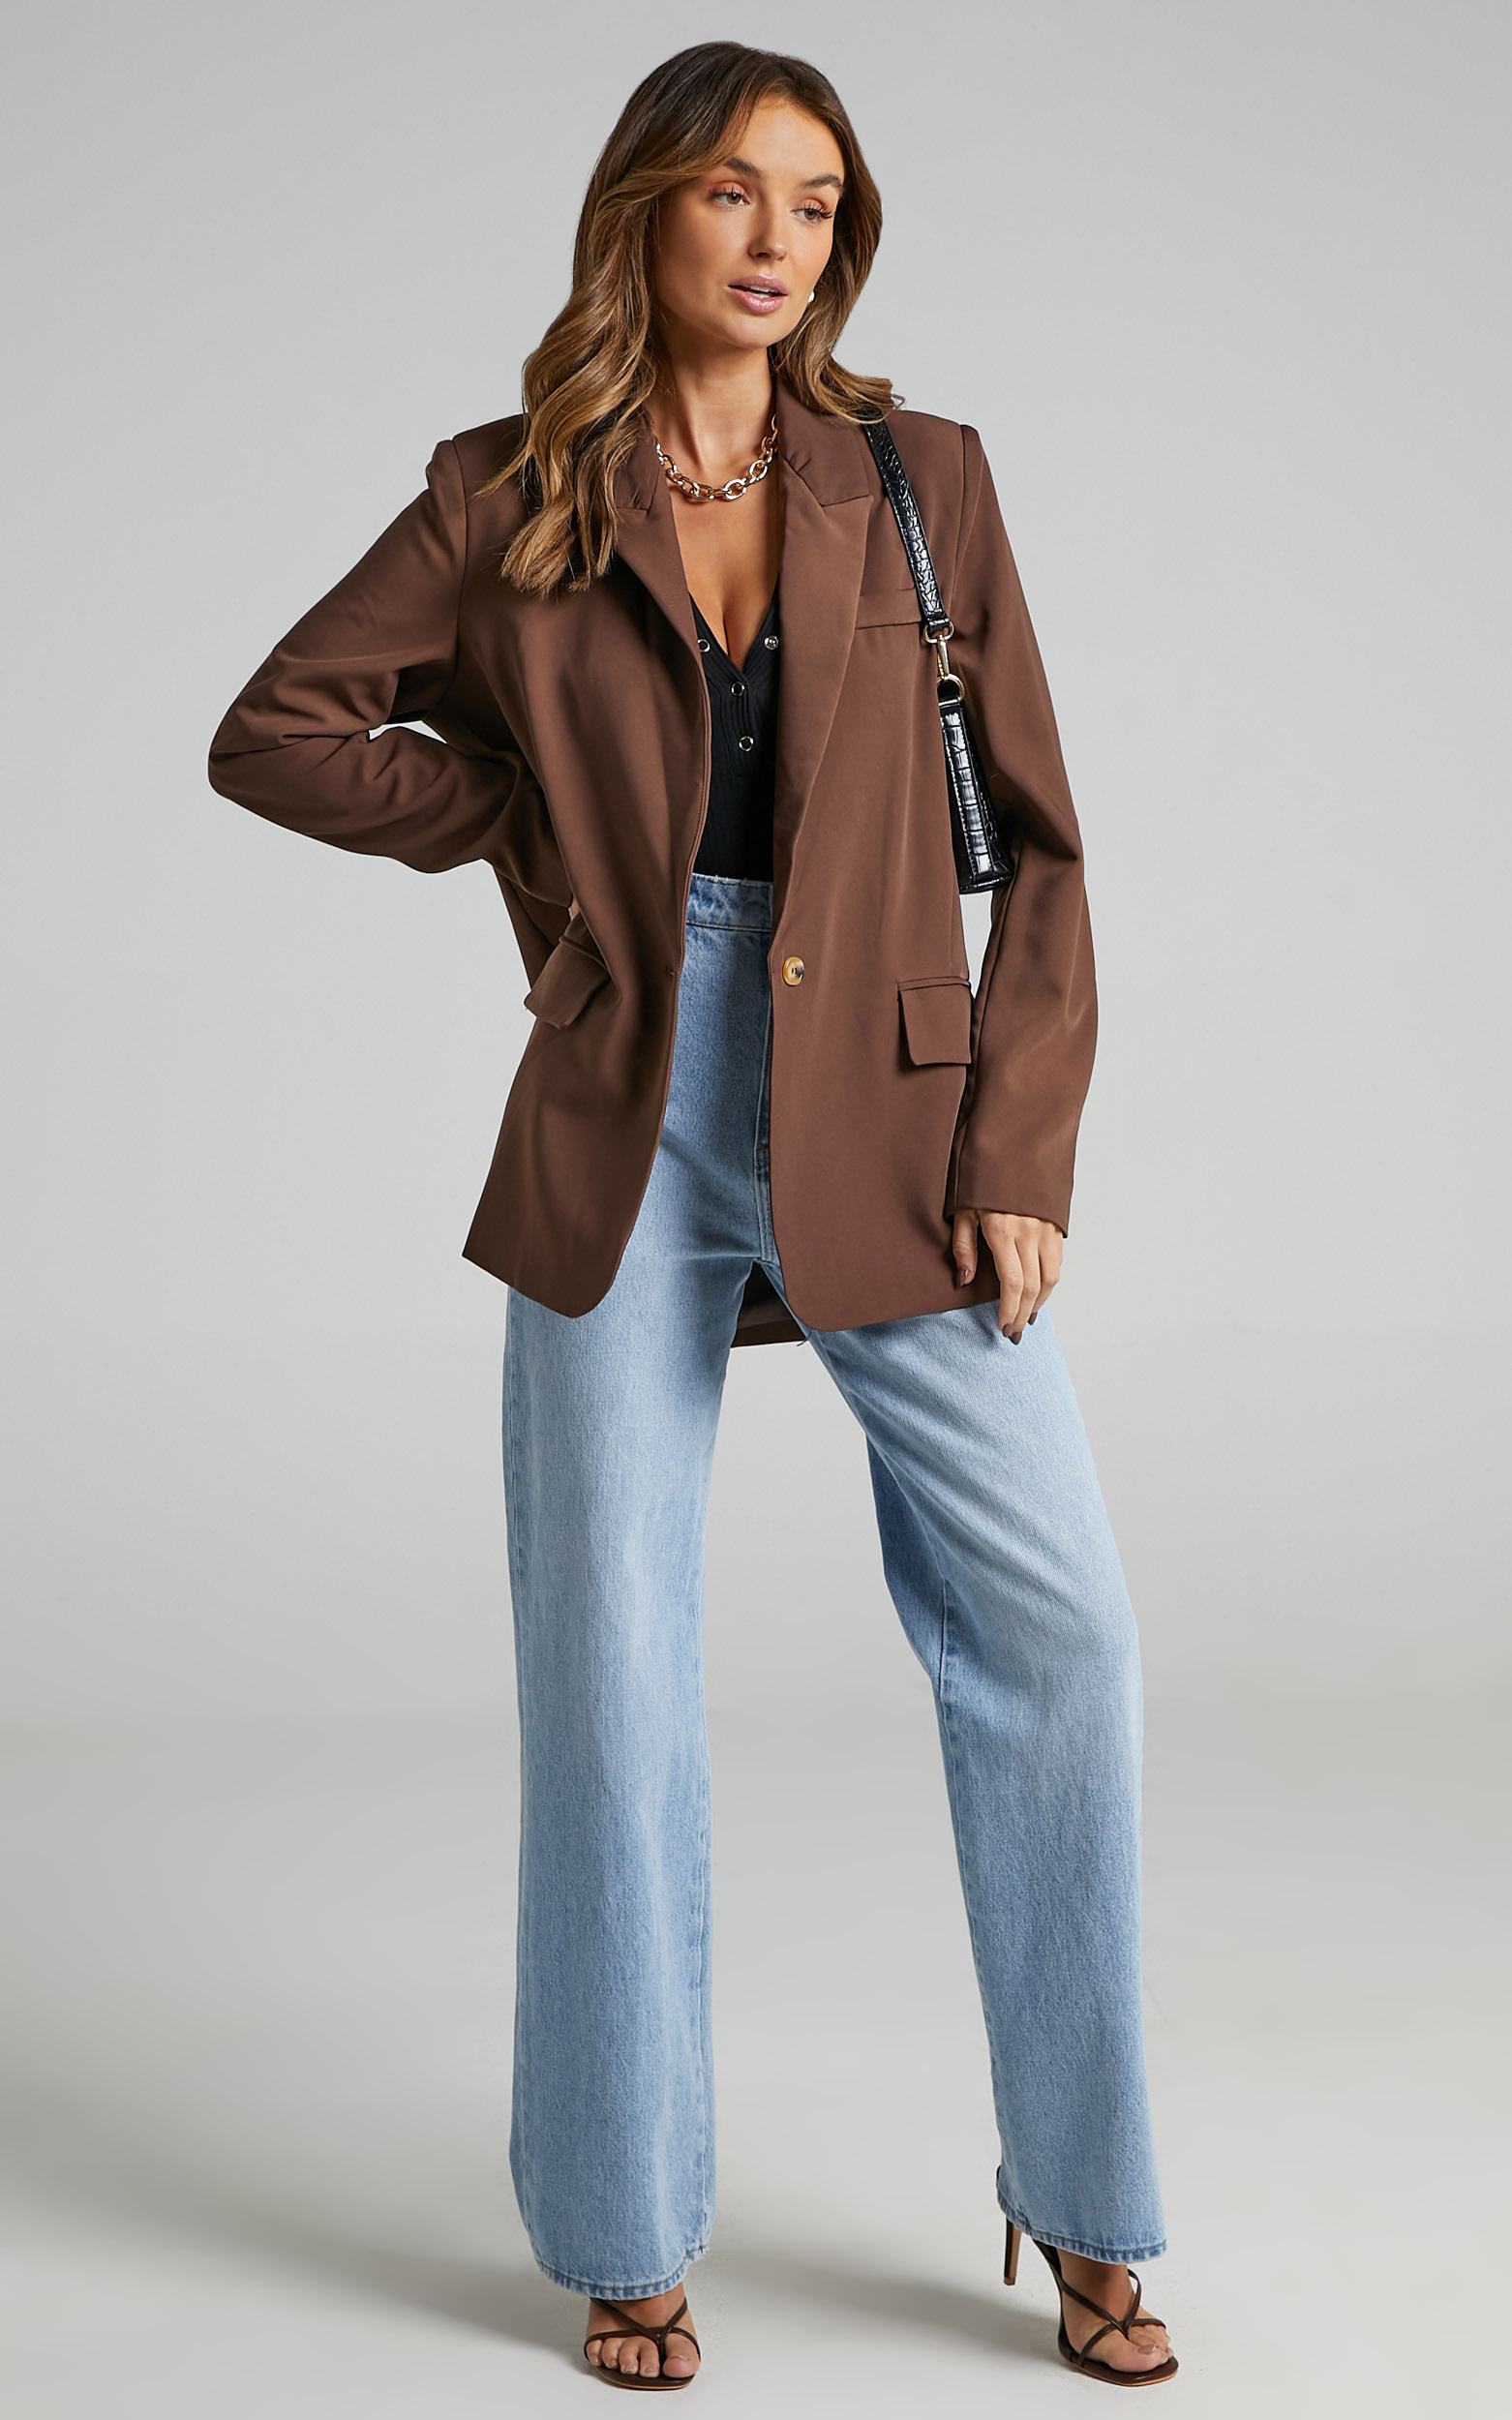 Caralina Blazer - Oversized Single Breasted Blazer in Chocolate - 06, BRN2, hi-res image number null